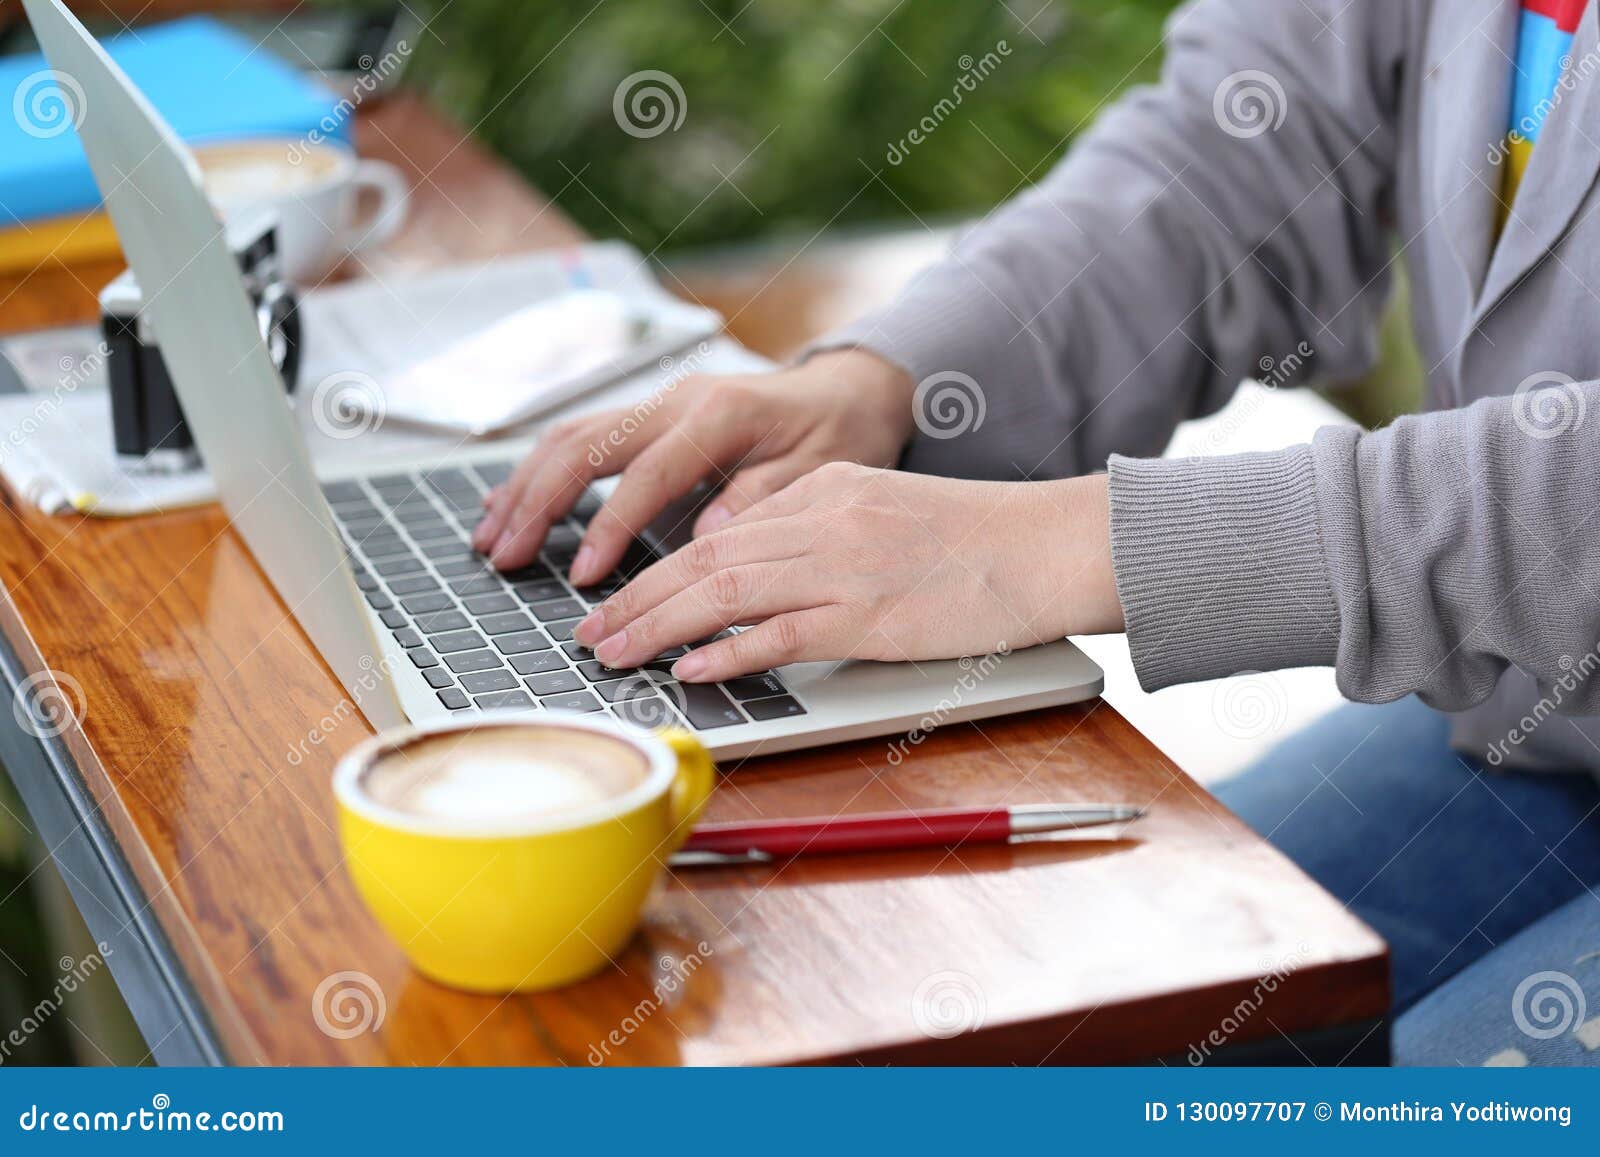 young woman of freelancer working using laptop computer in coffee shop, communication technology and business concept